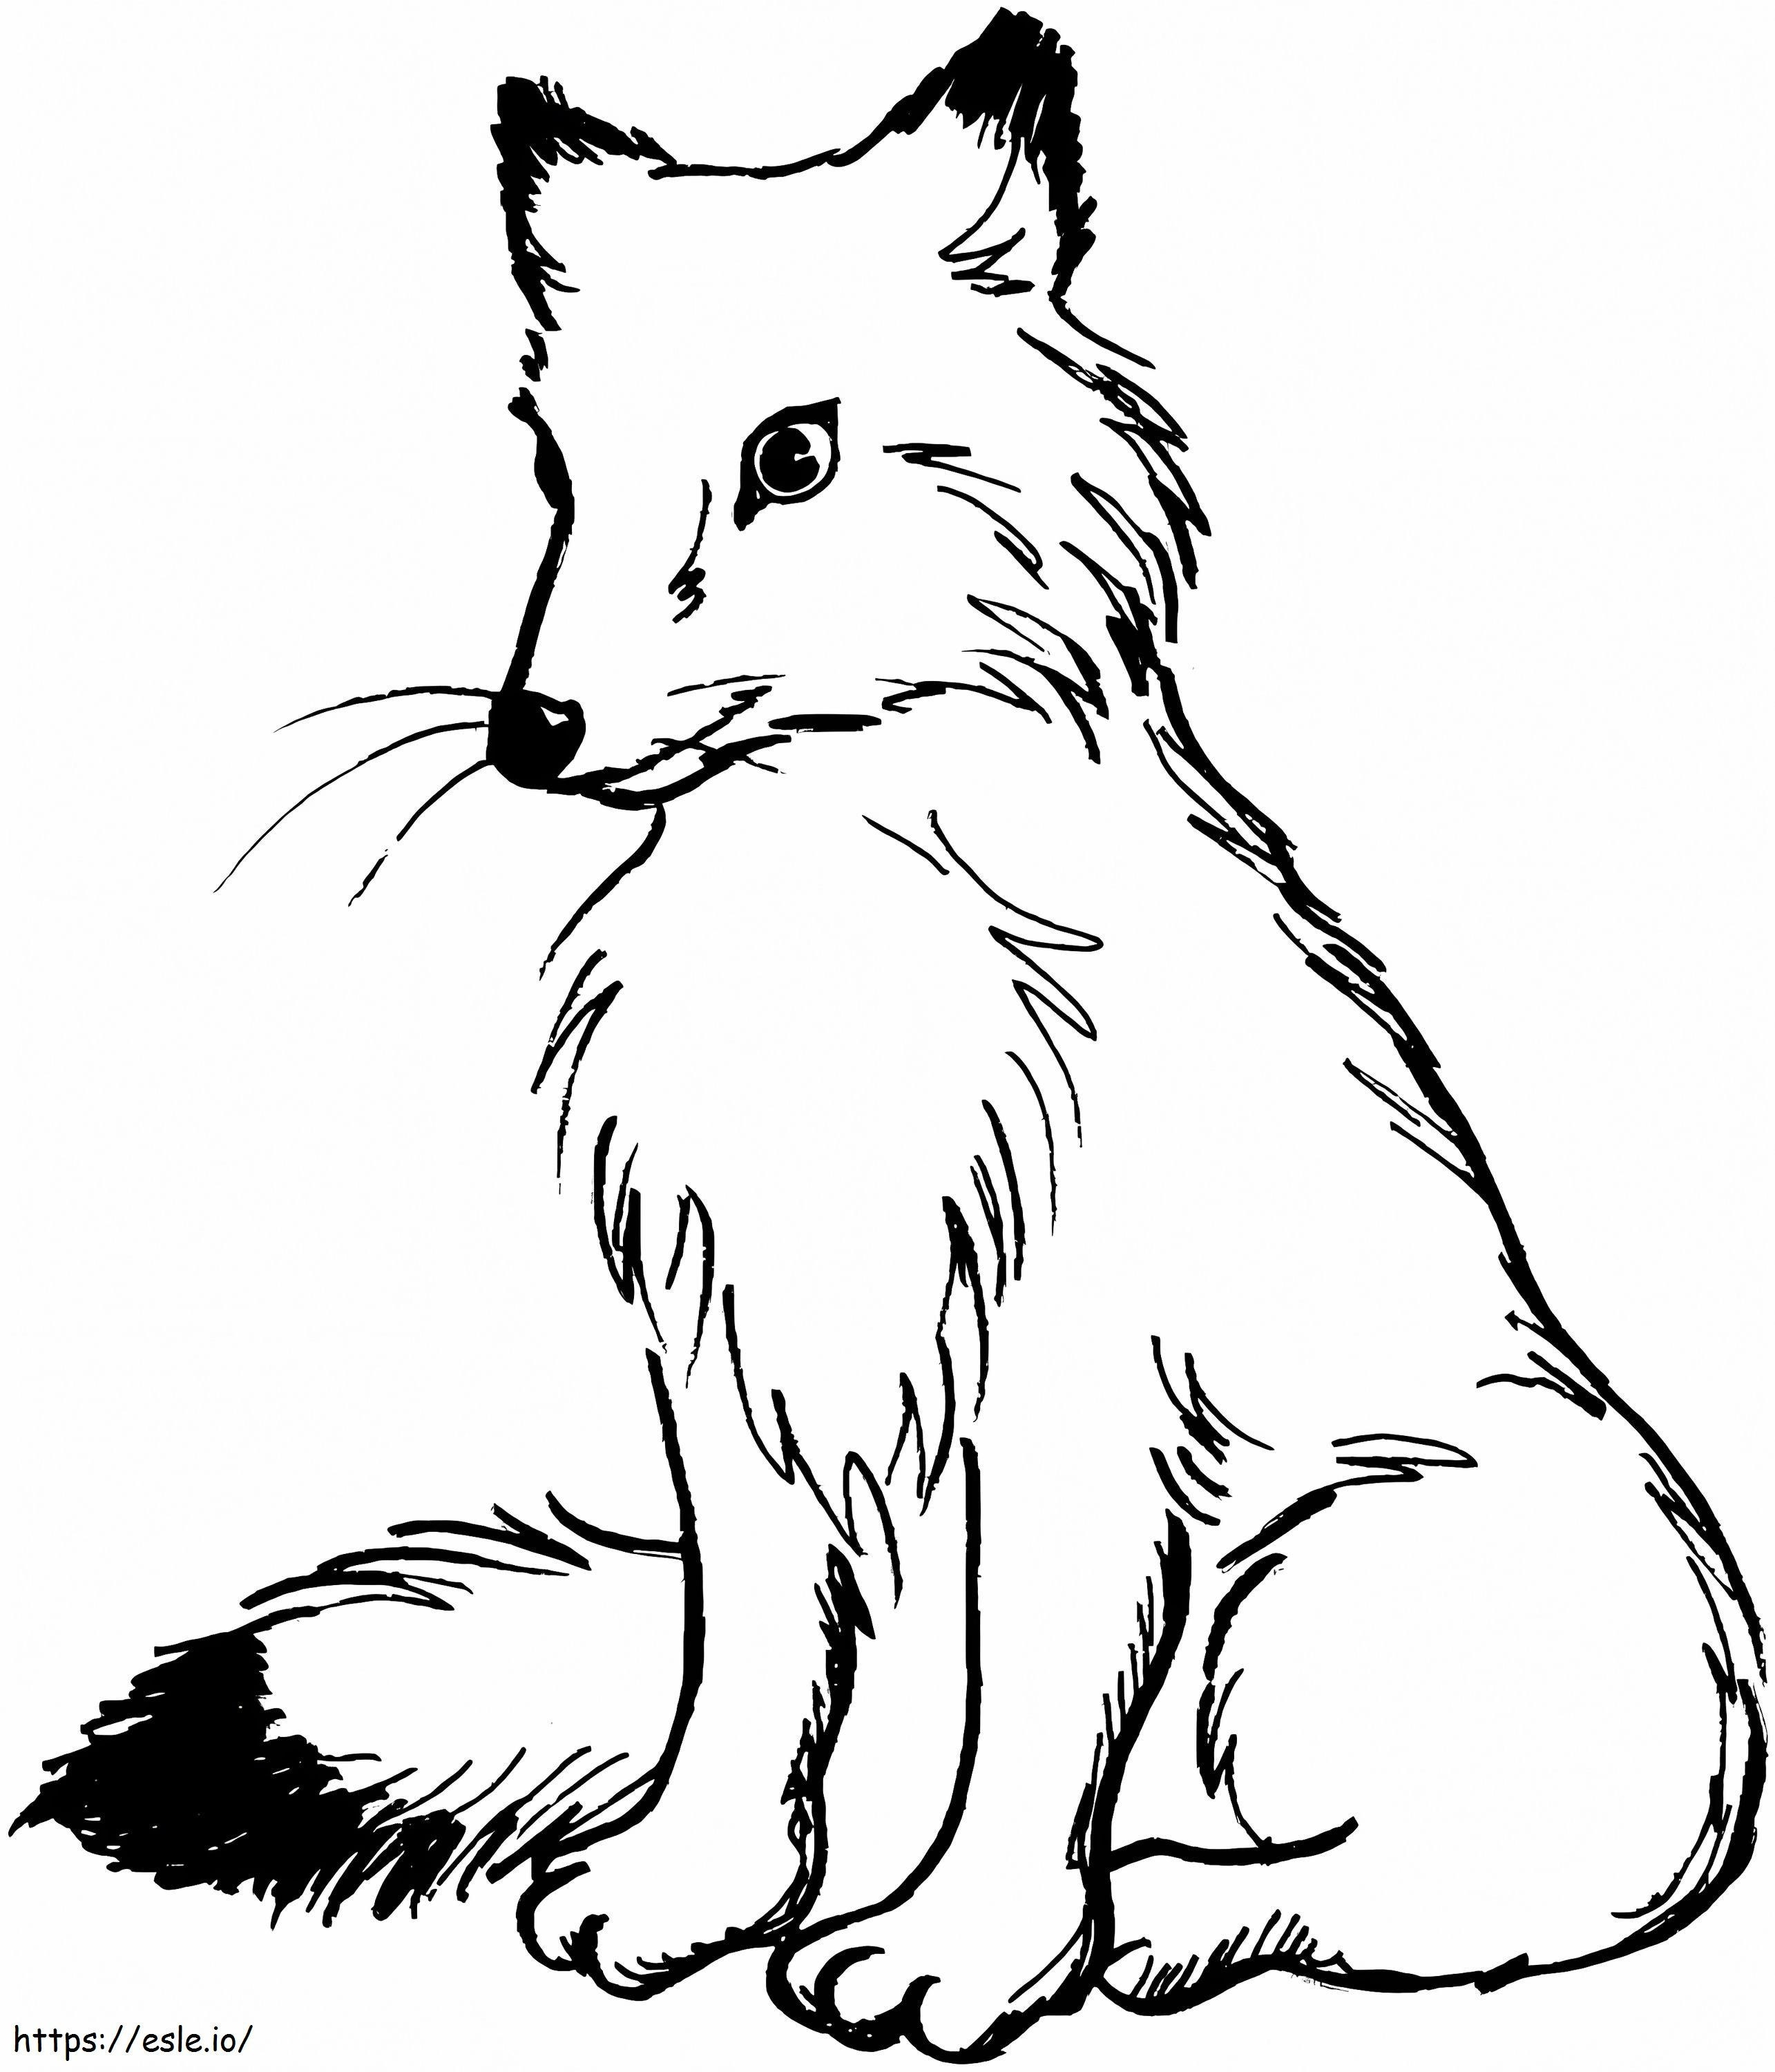 A Wild Fox coloring page